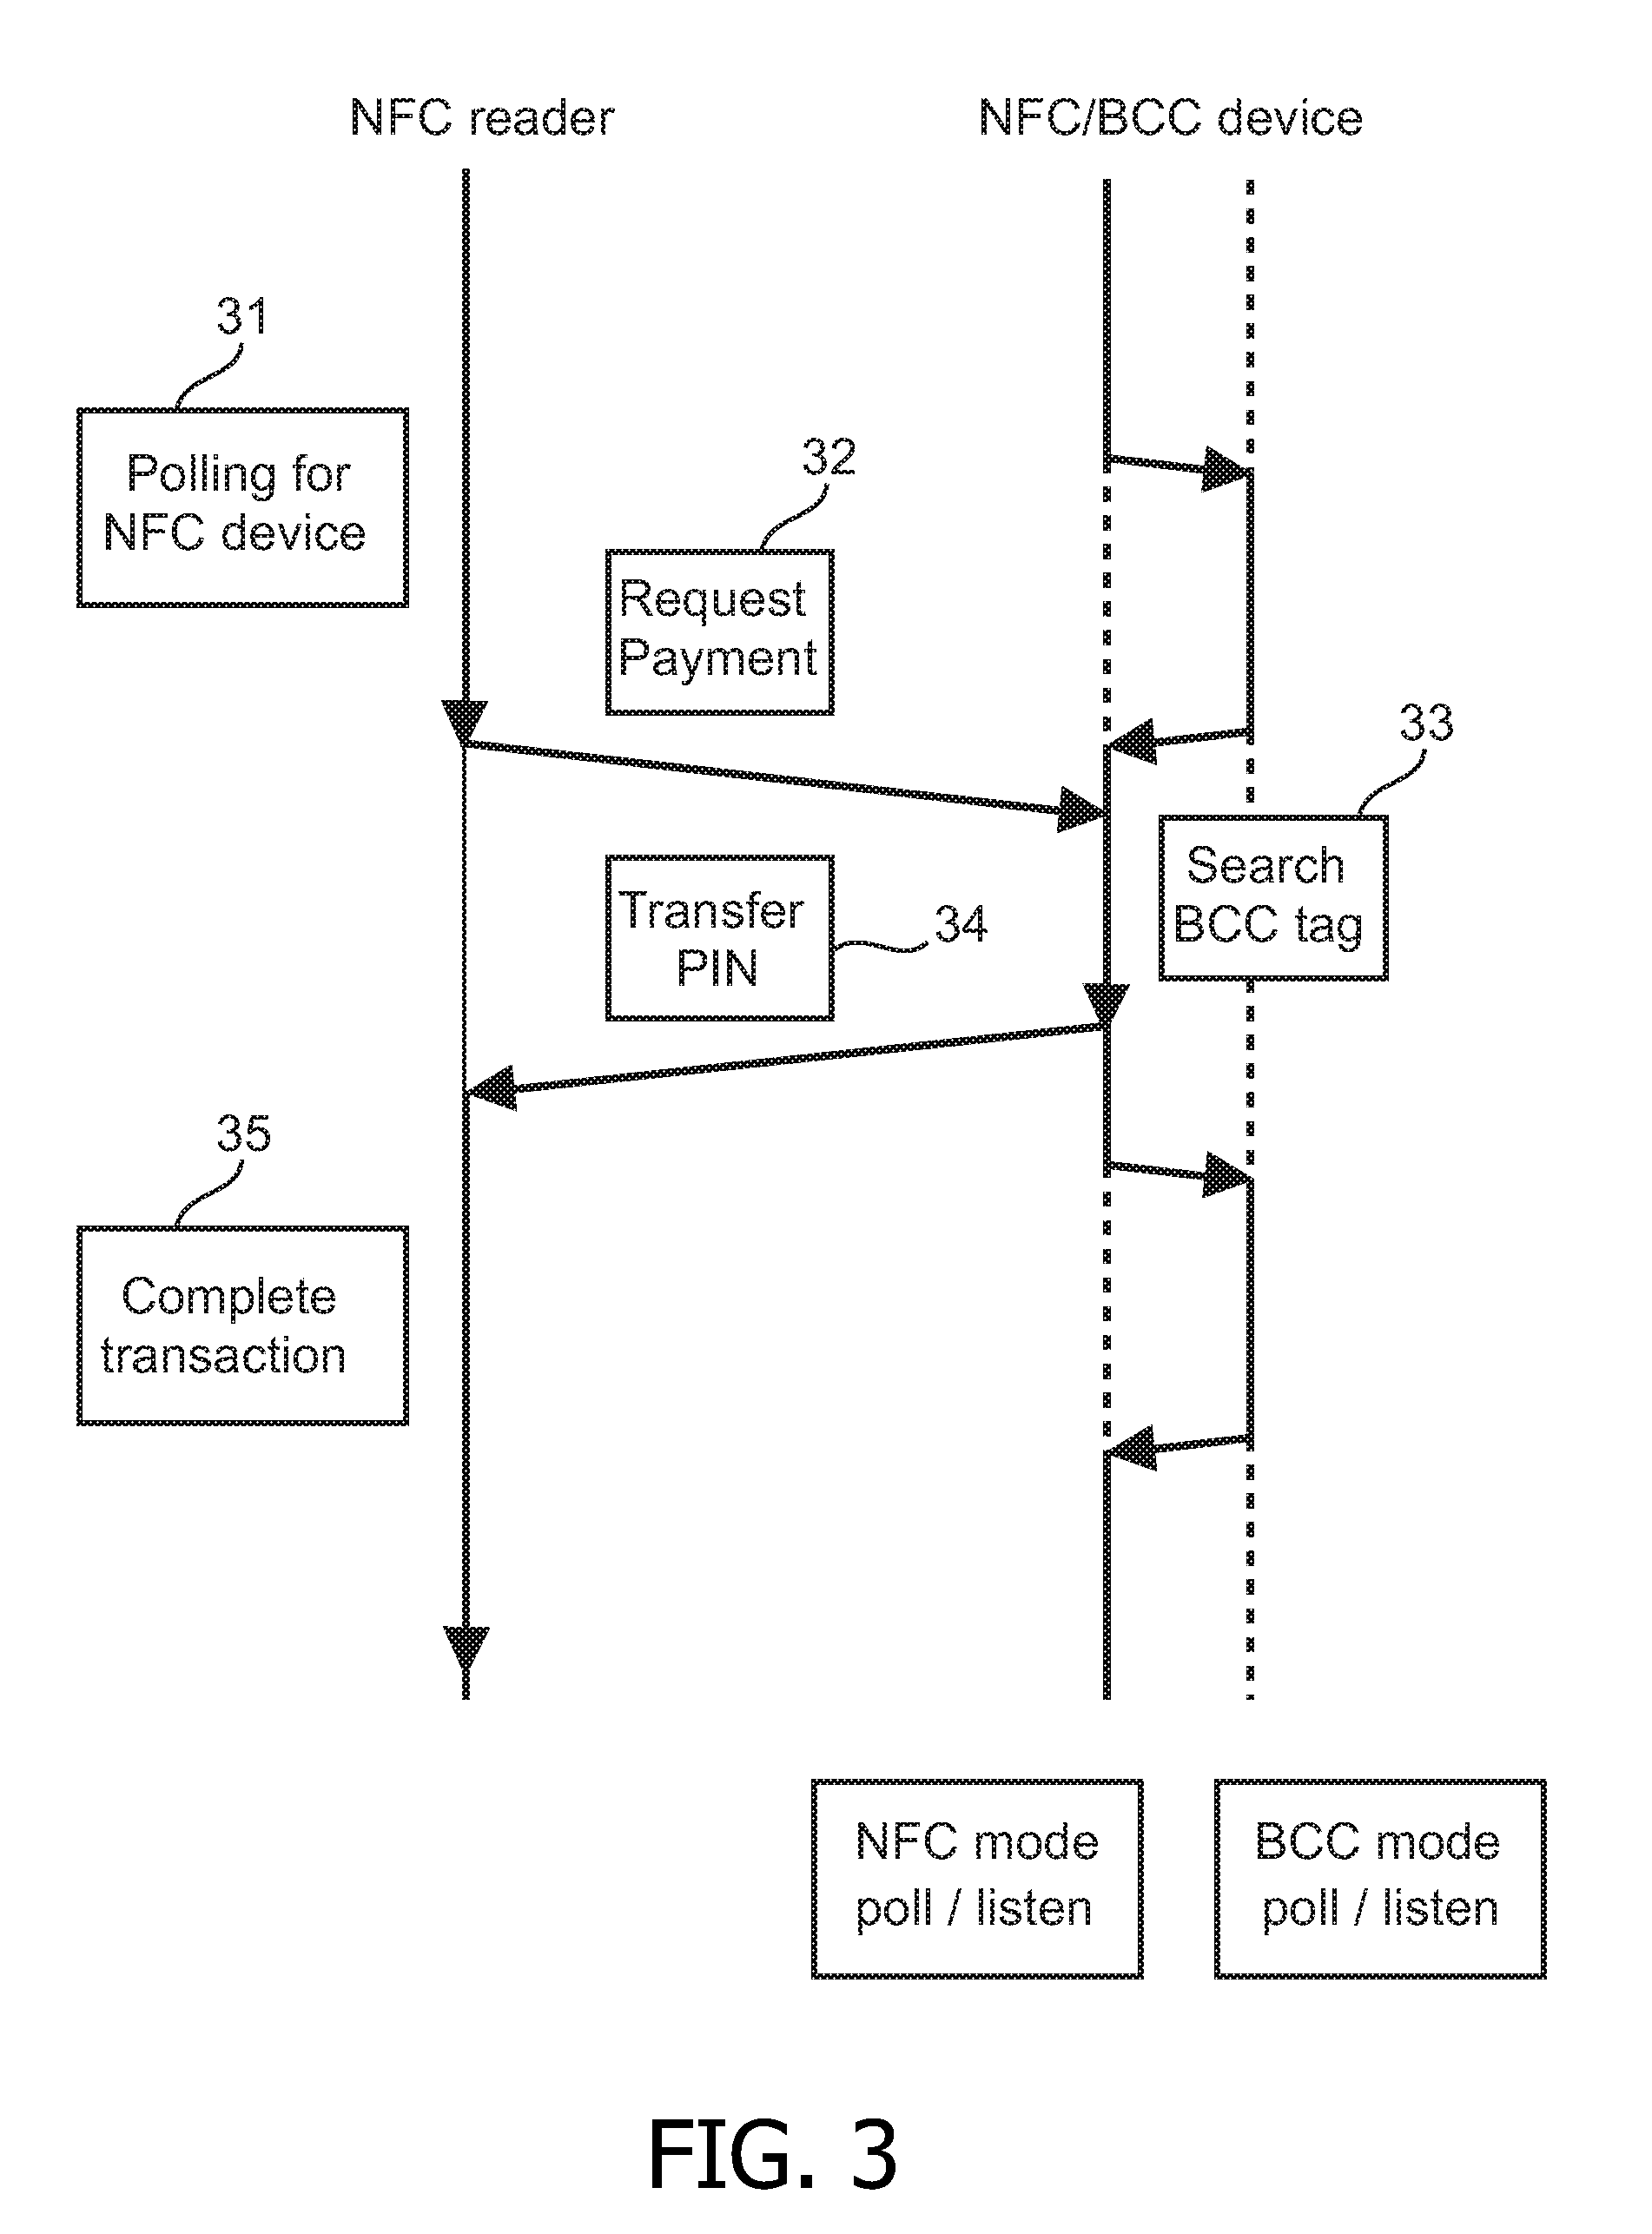 Switching between multiple coupling modes